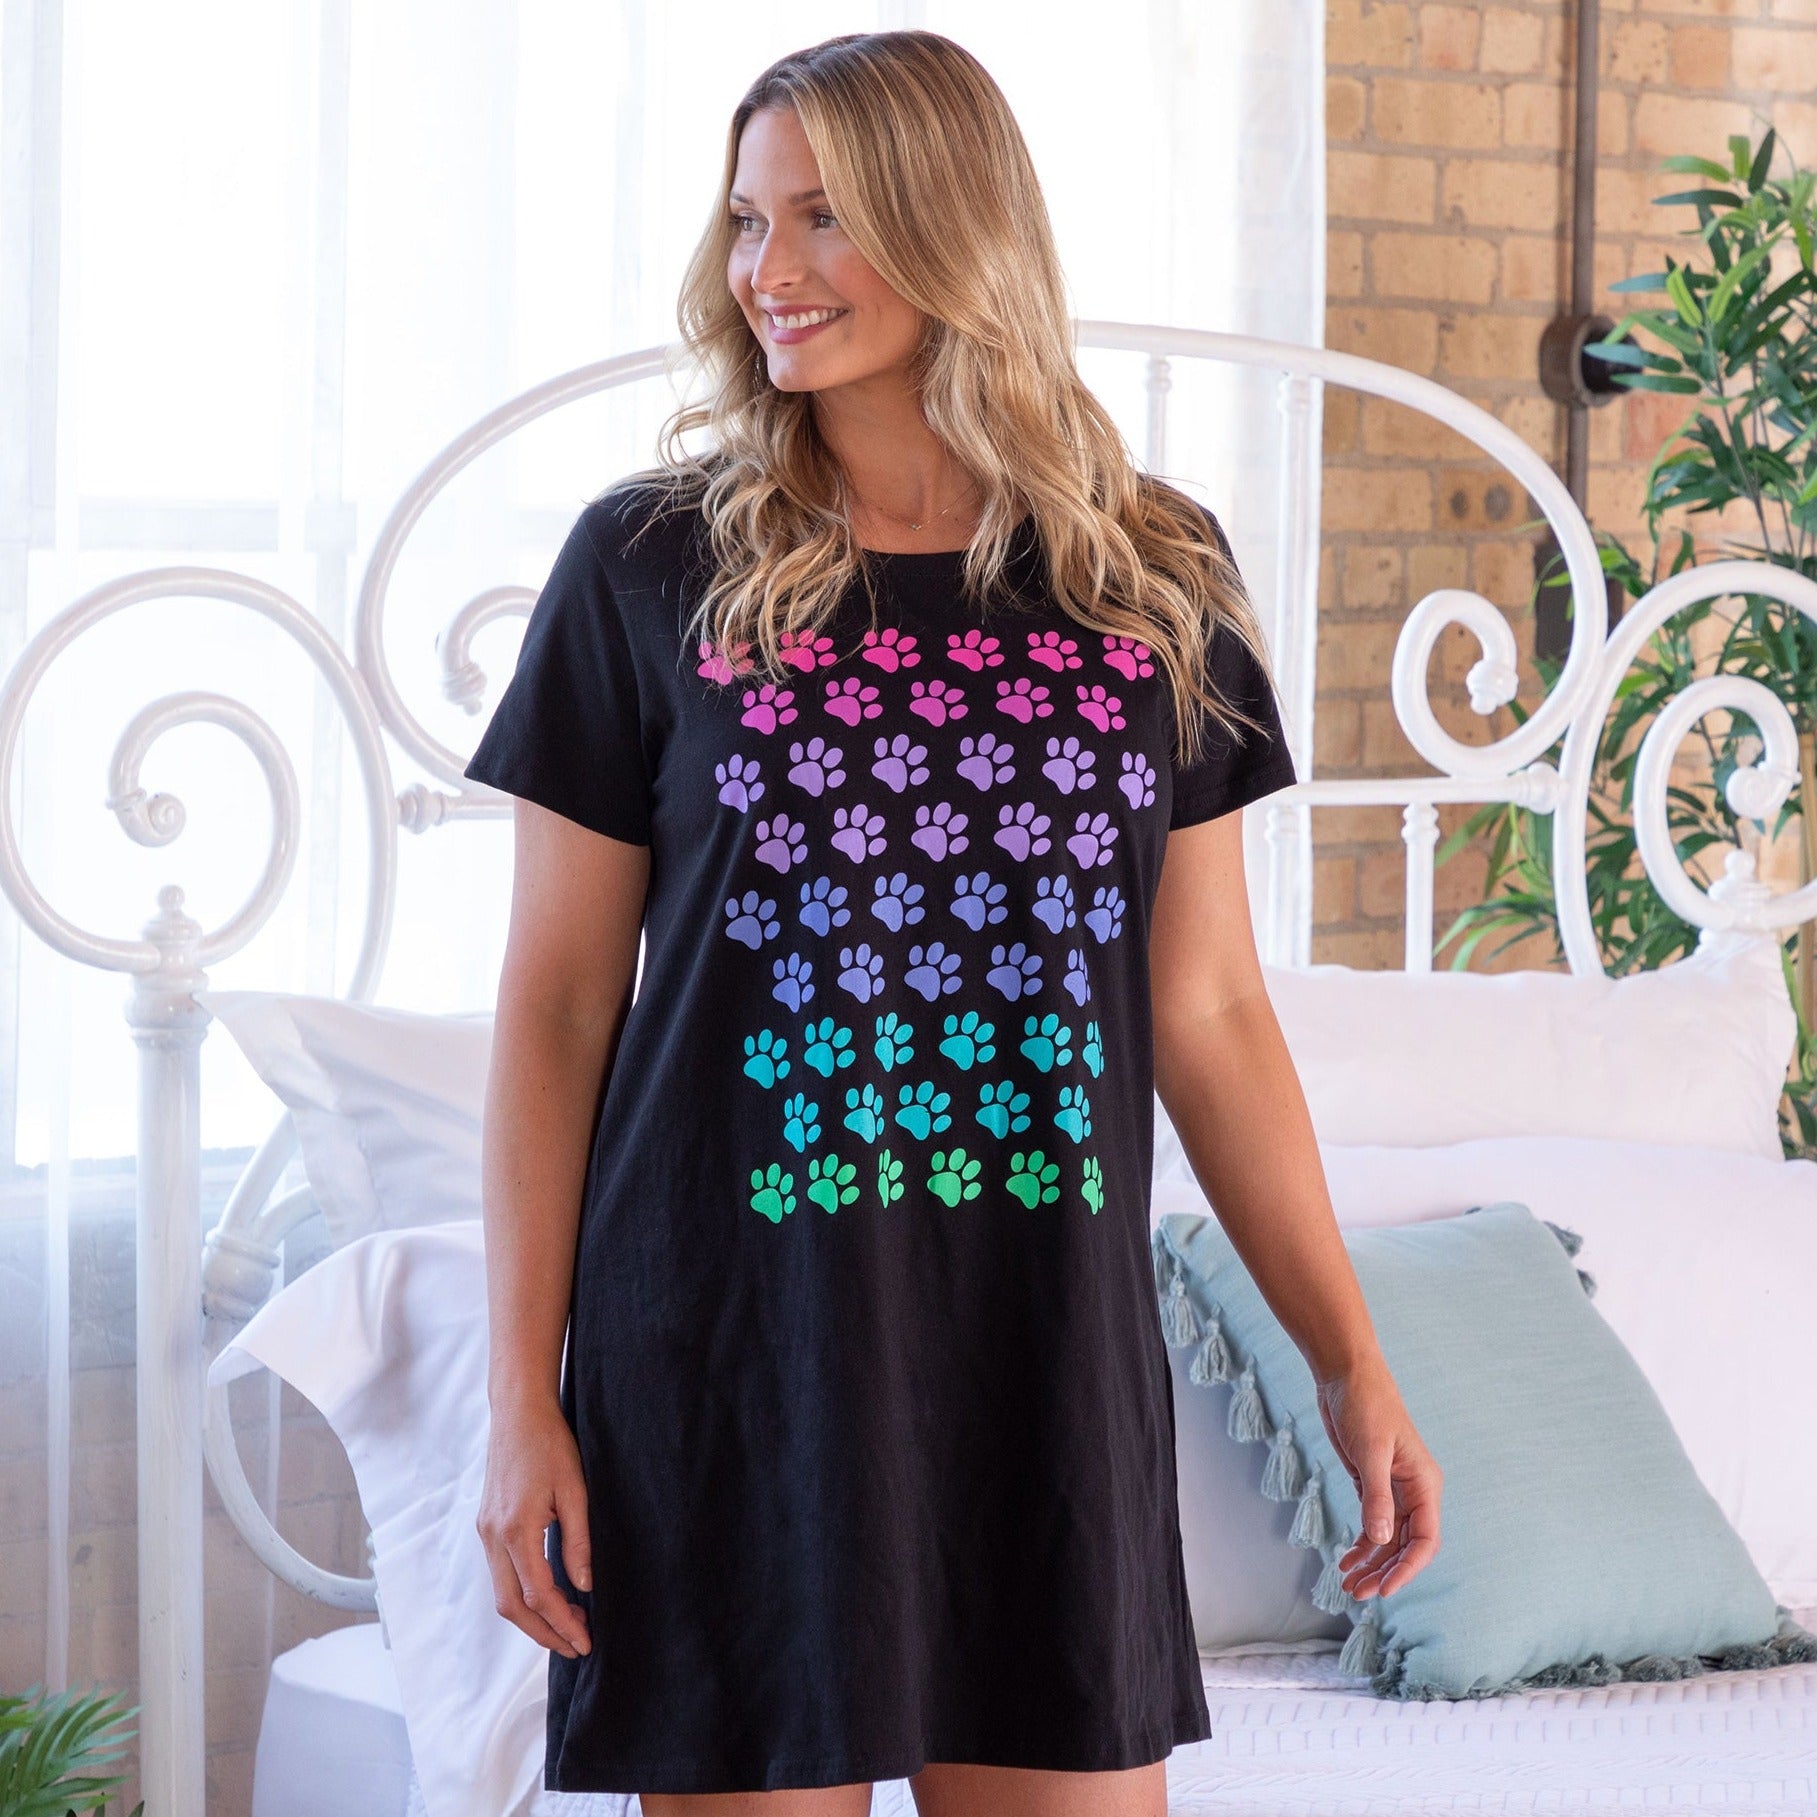 Rainbow Paws Nightgown - S/M